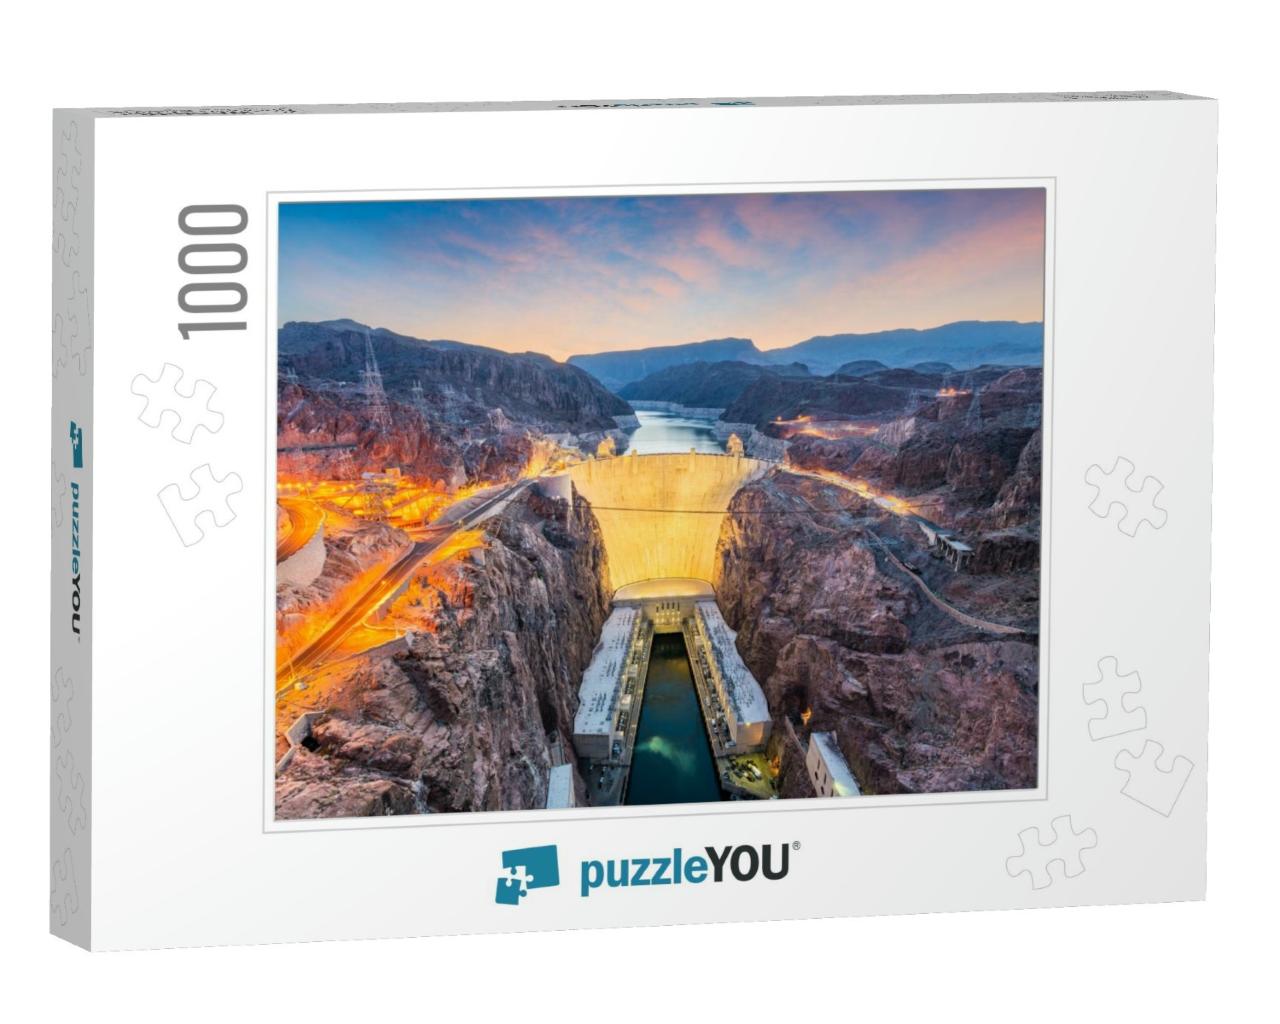 Hoover Dam on the Colorado River Straddling Nevada & Ariz... Jigsaw Puzzle with 1000 pieces